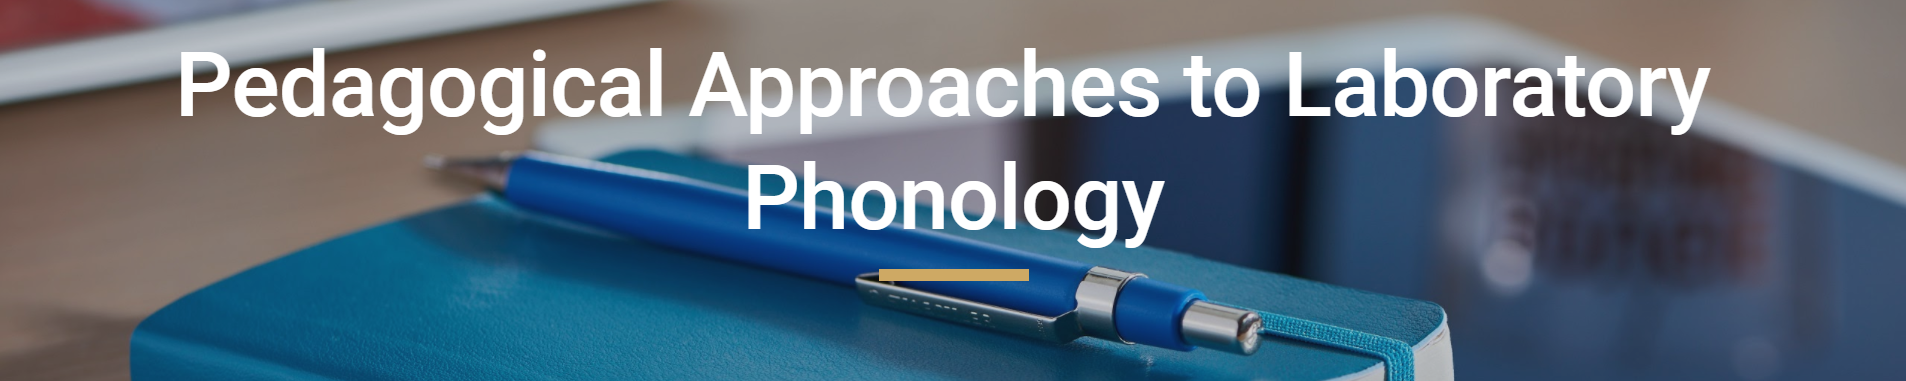 Pedagogical Approaches to Laboratory Phonology